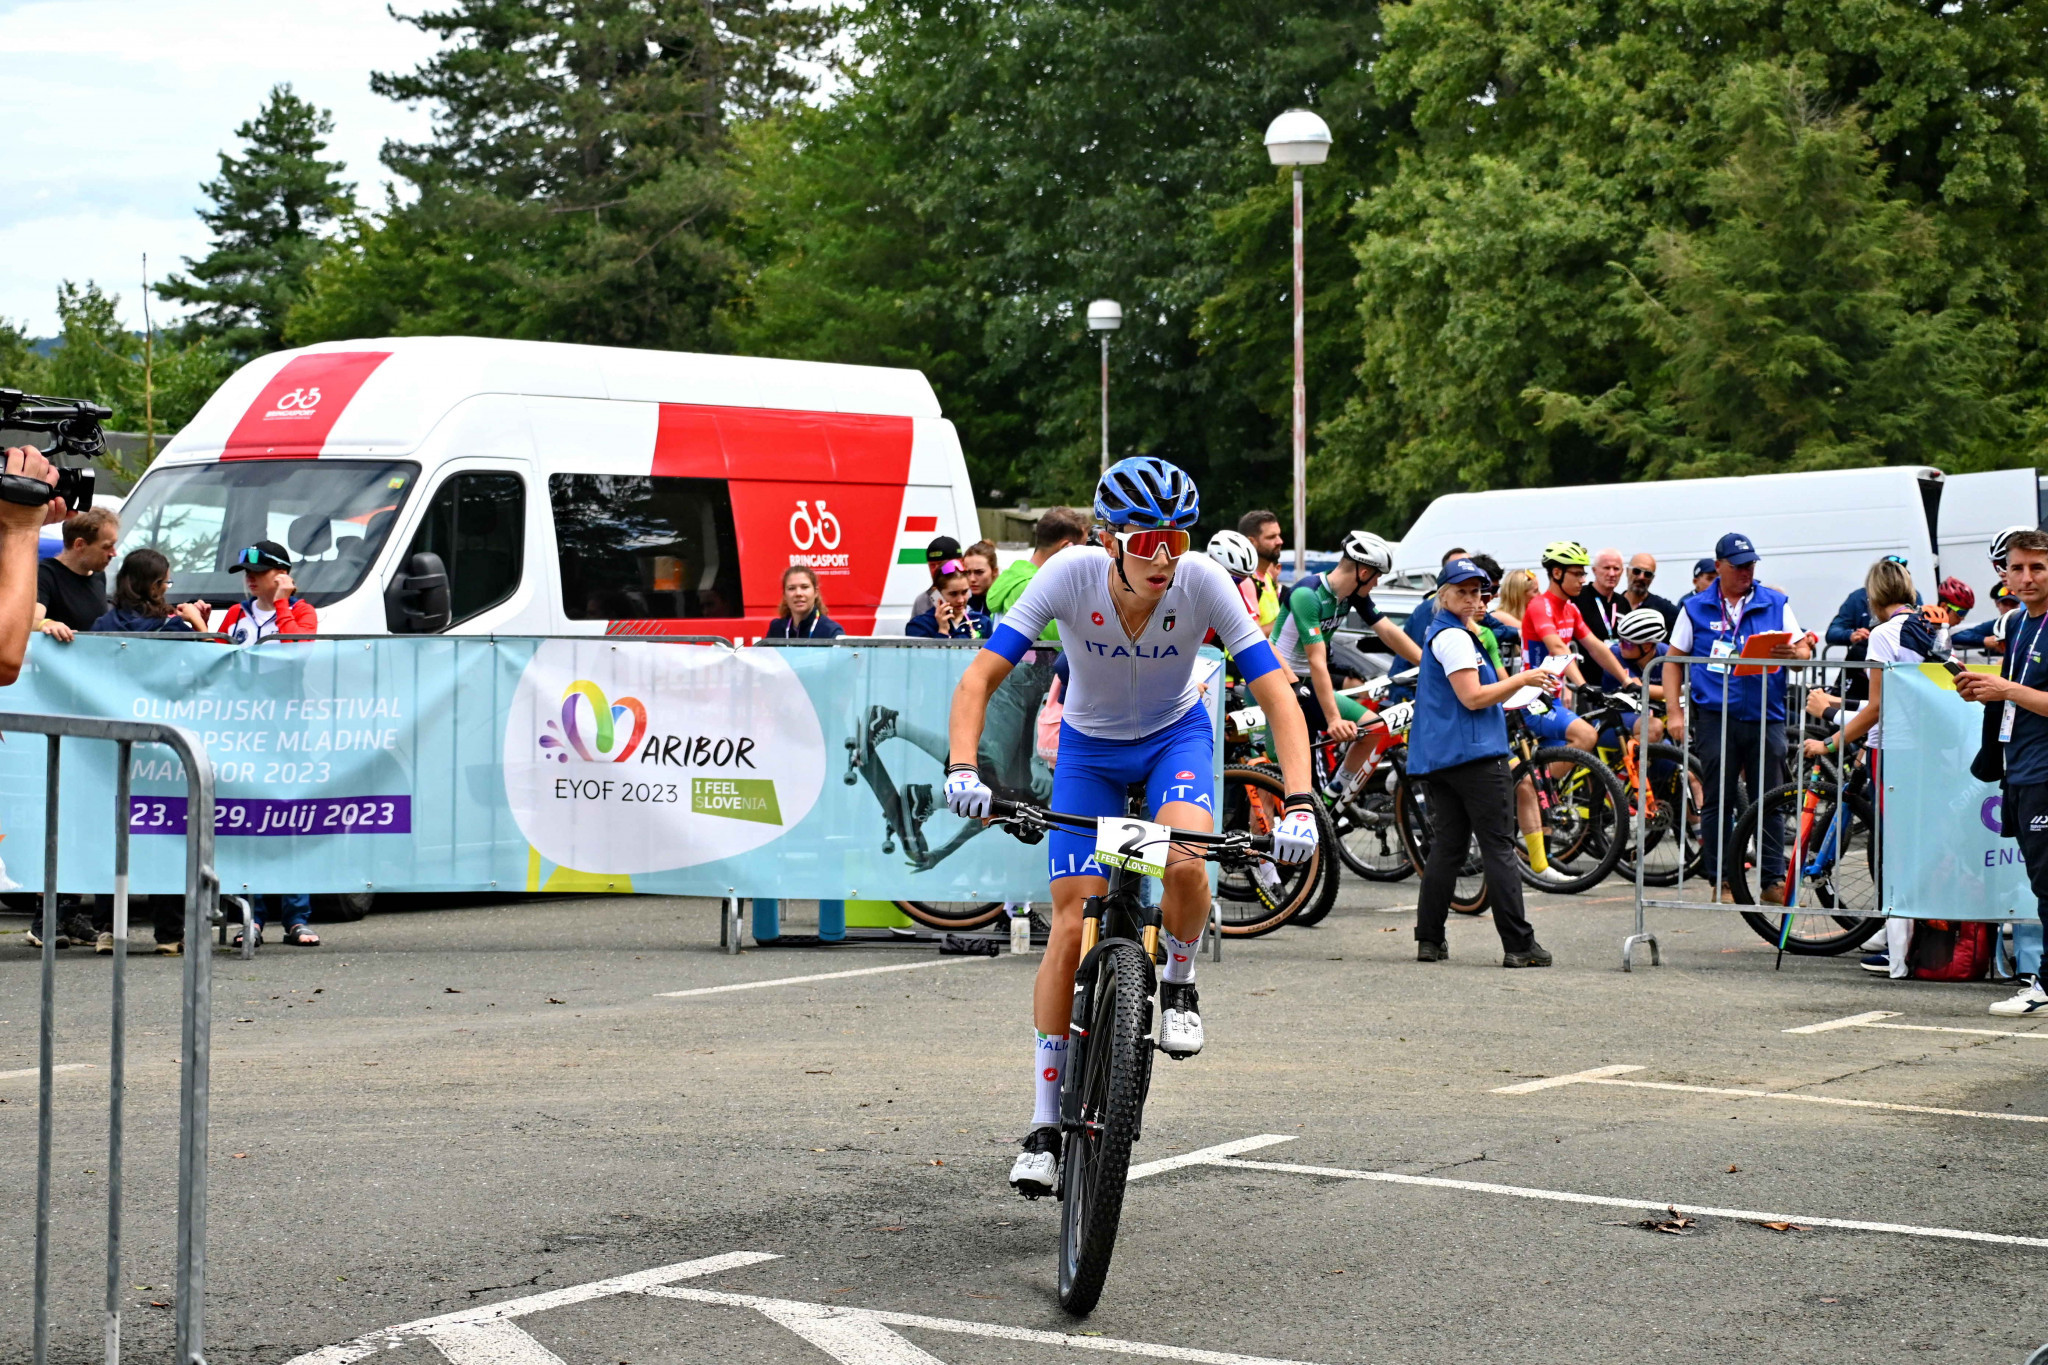 Italy finished strongly in road cycling today ©EYOF 2023